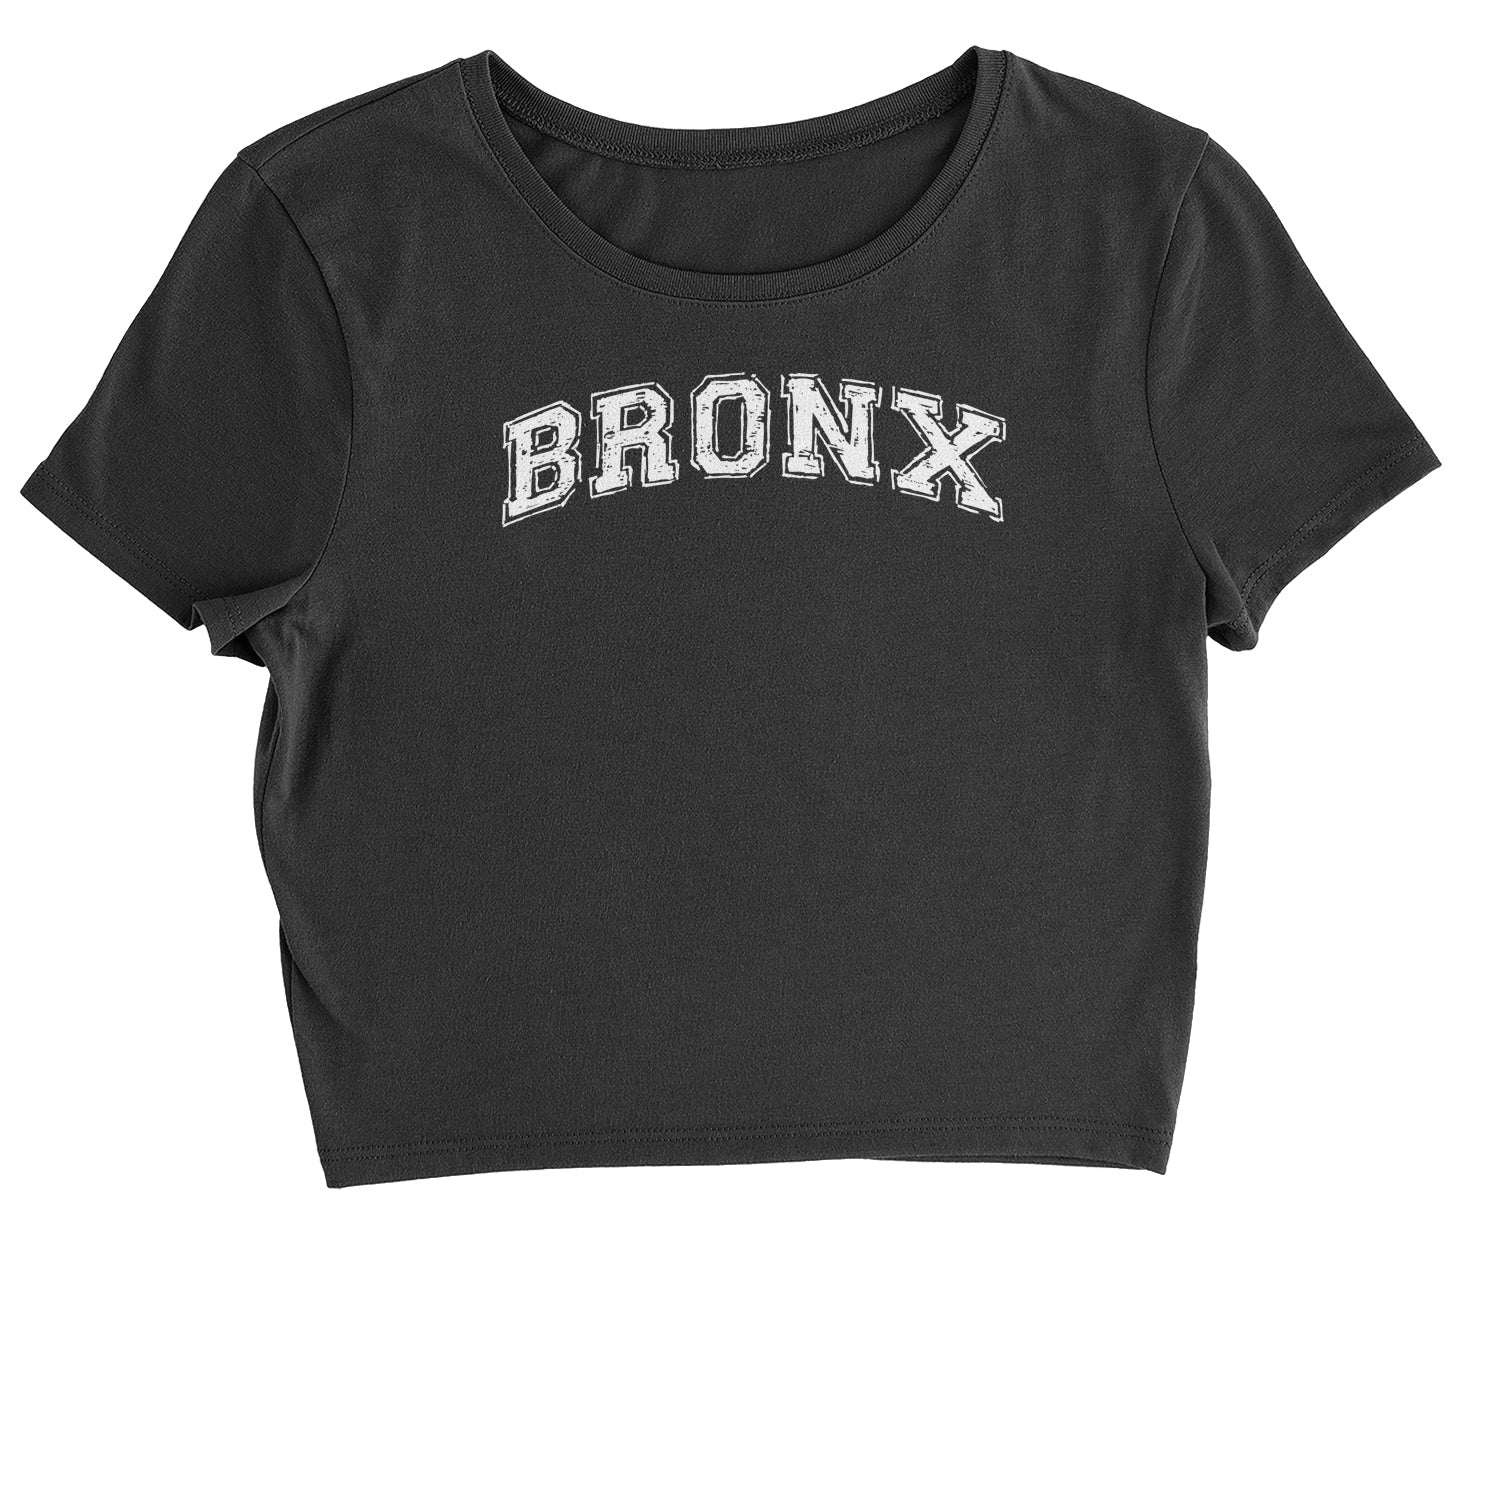 Bronx - From The Block Cropped T-Shirt b, cardi, concert, its, Jennifer, lopez, merch, my, party, tour by Expression Tees